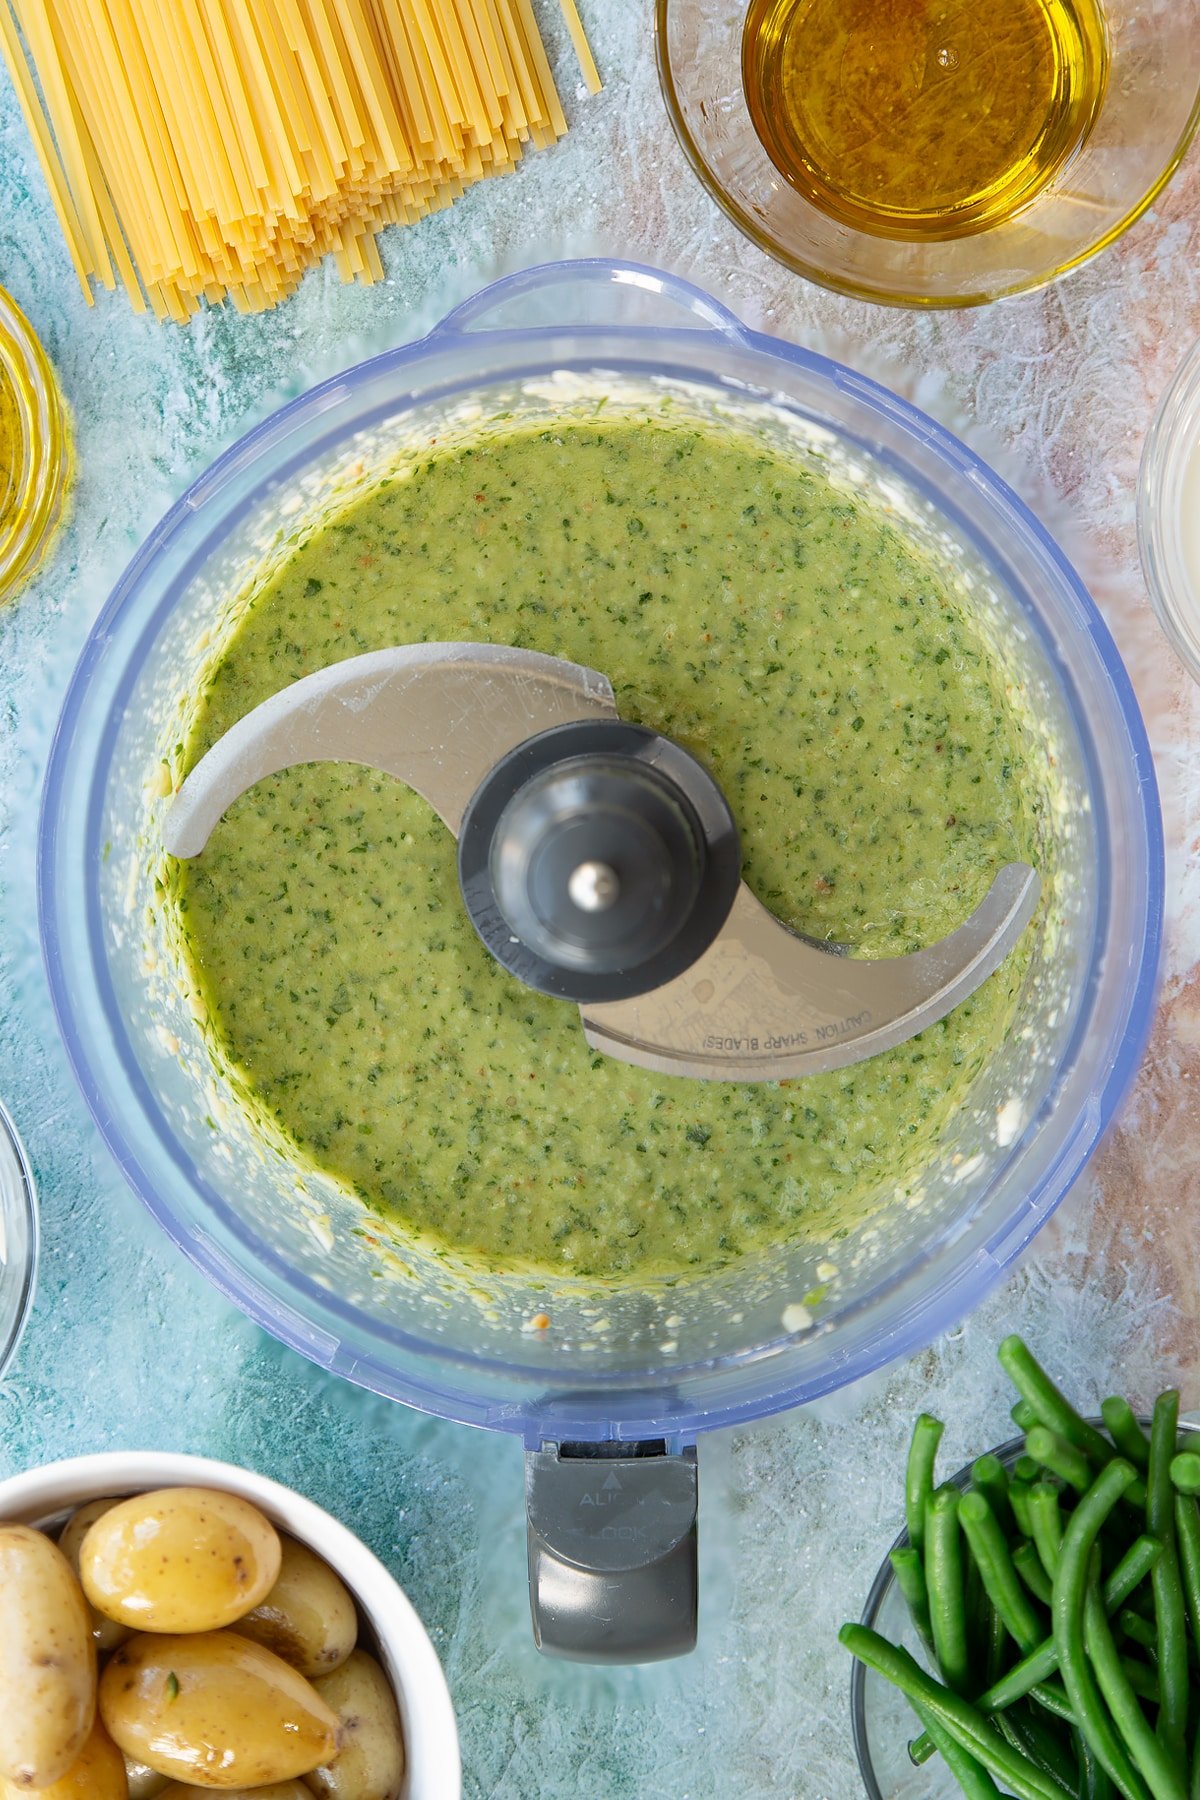 Overhead shot after the blender has been used to create the pesto from ingredients.